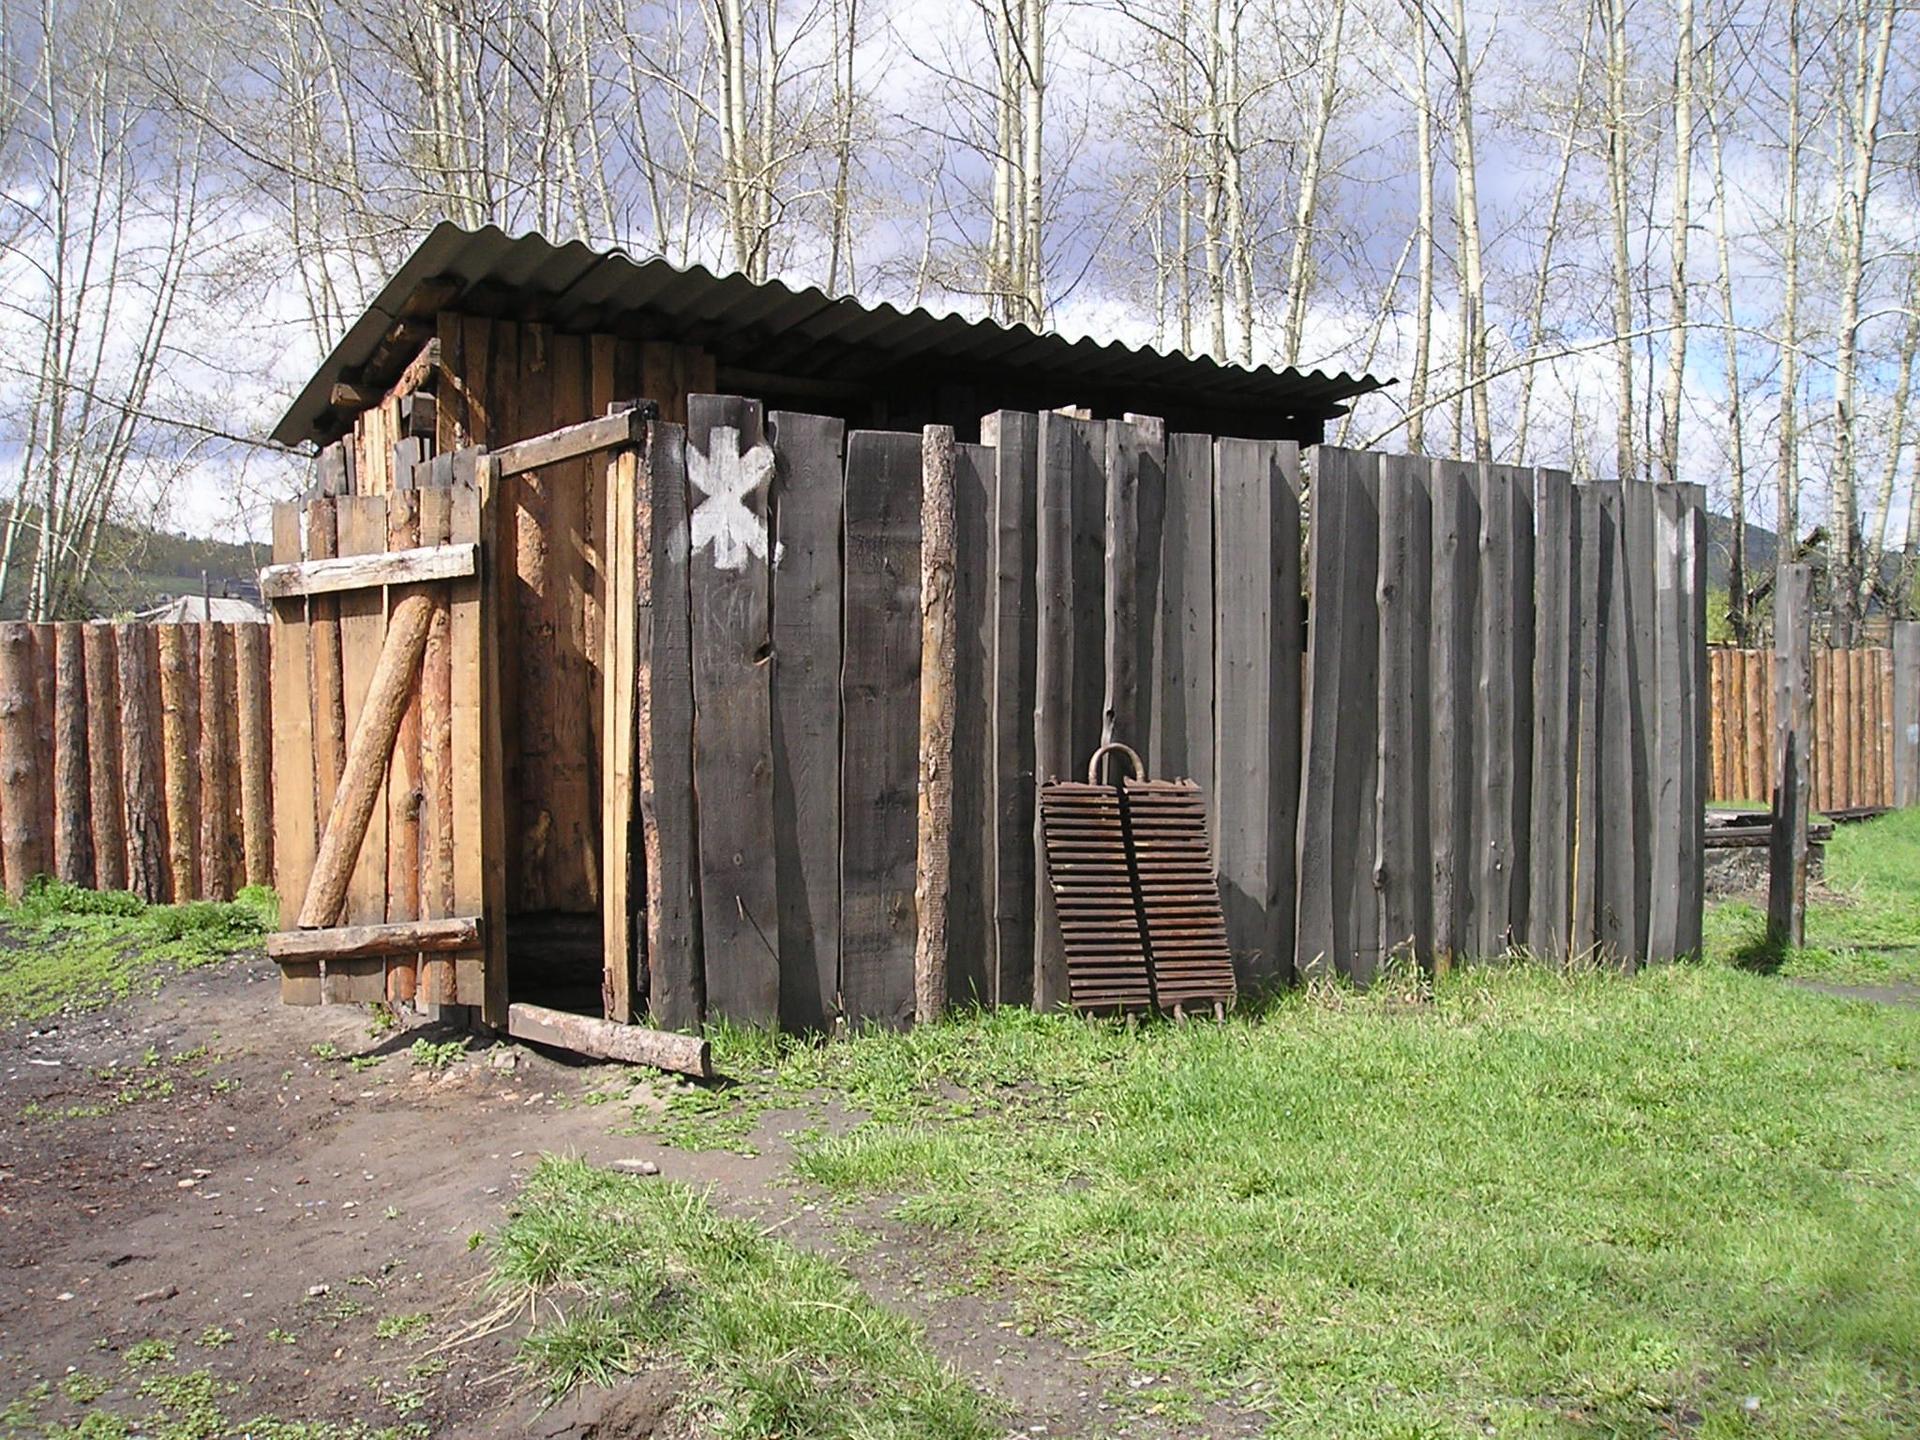 "I've had a lot more experience with really lo-fi toilets abroad - I'm talking about latrines, outhouses," like this one in Siberia.